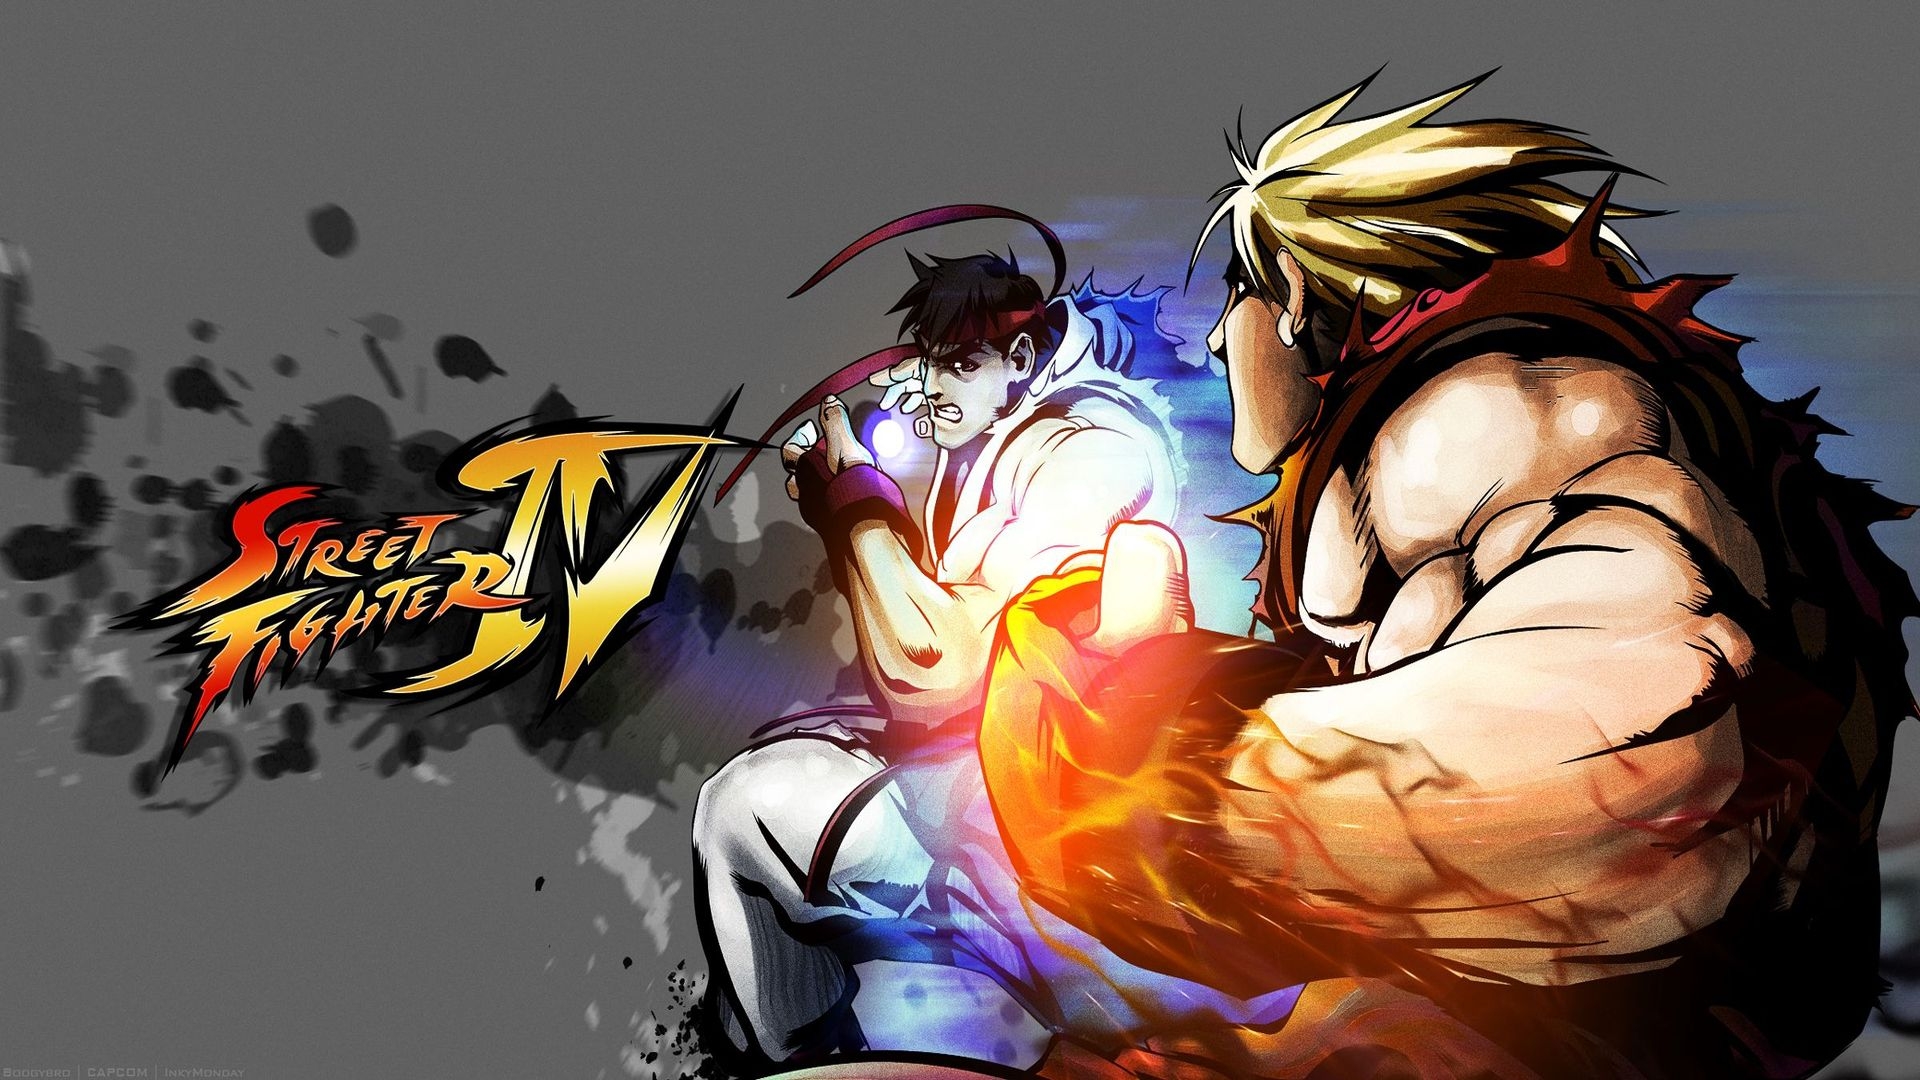 Awesome Street Fighter HD Image Street Fighter HD Backgrounds